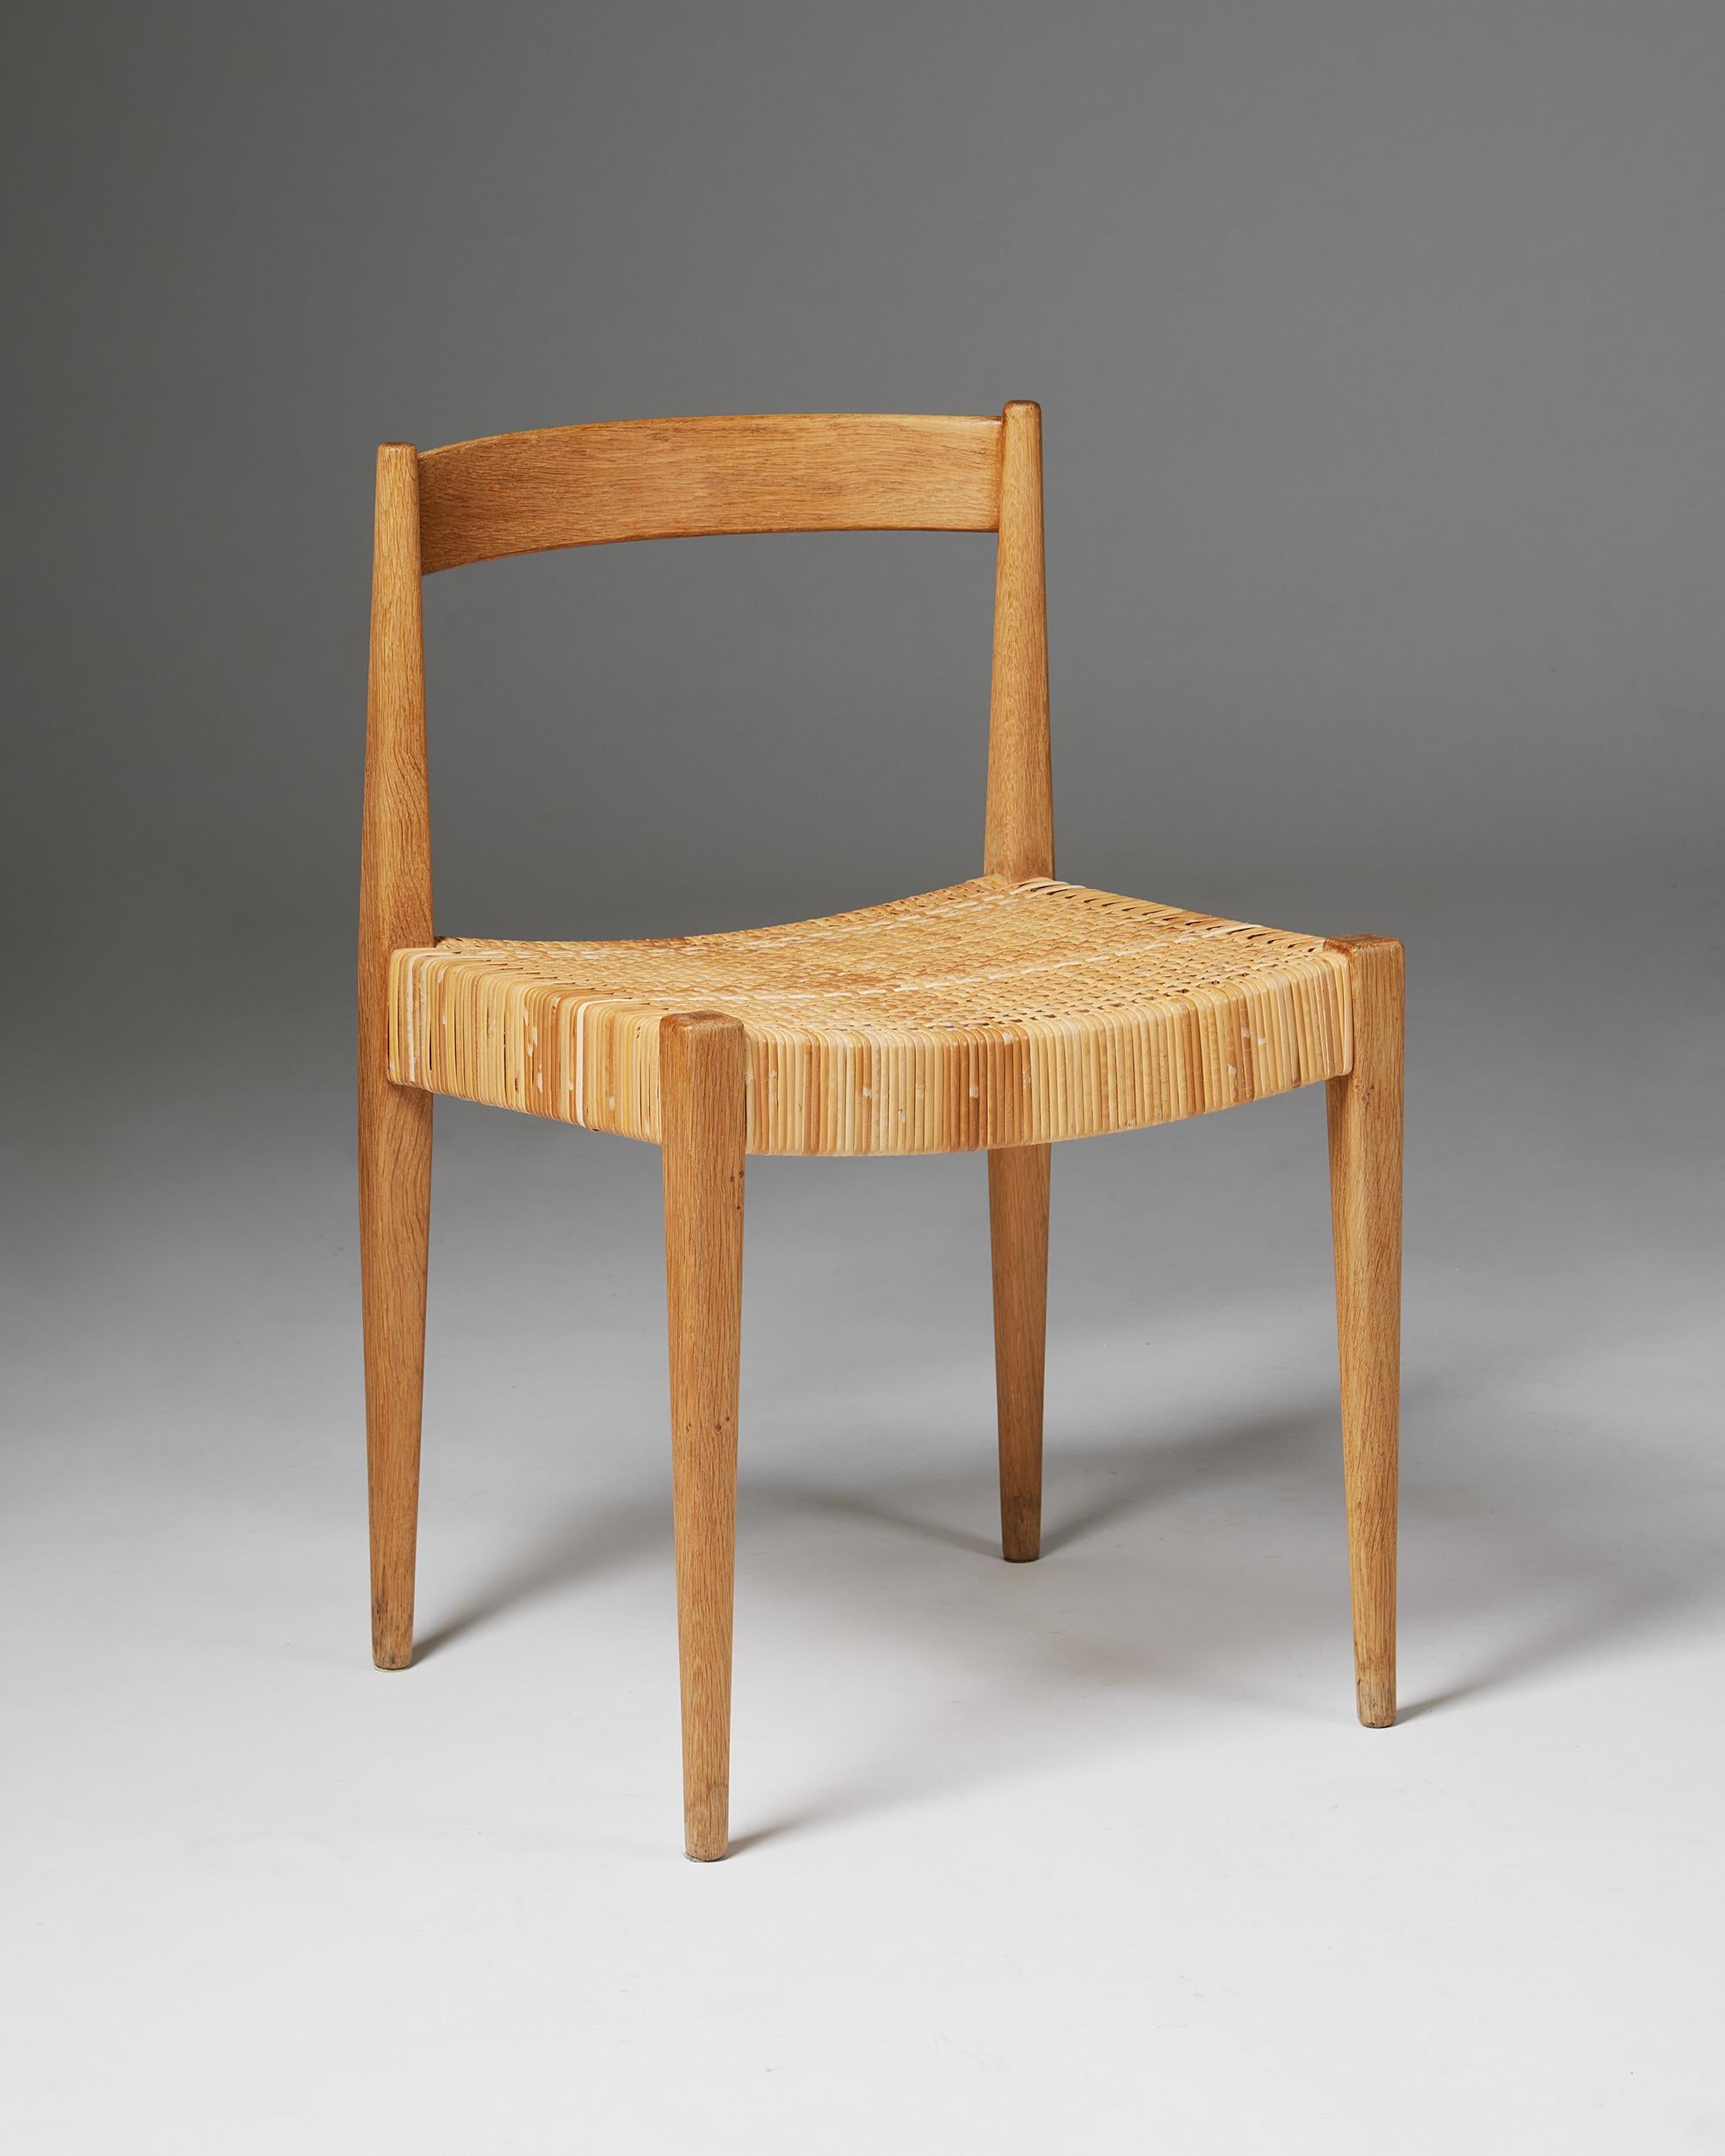 Danish Set of Ten Dining Chairs Designed by Nanna and Jorgen Ditzel